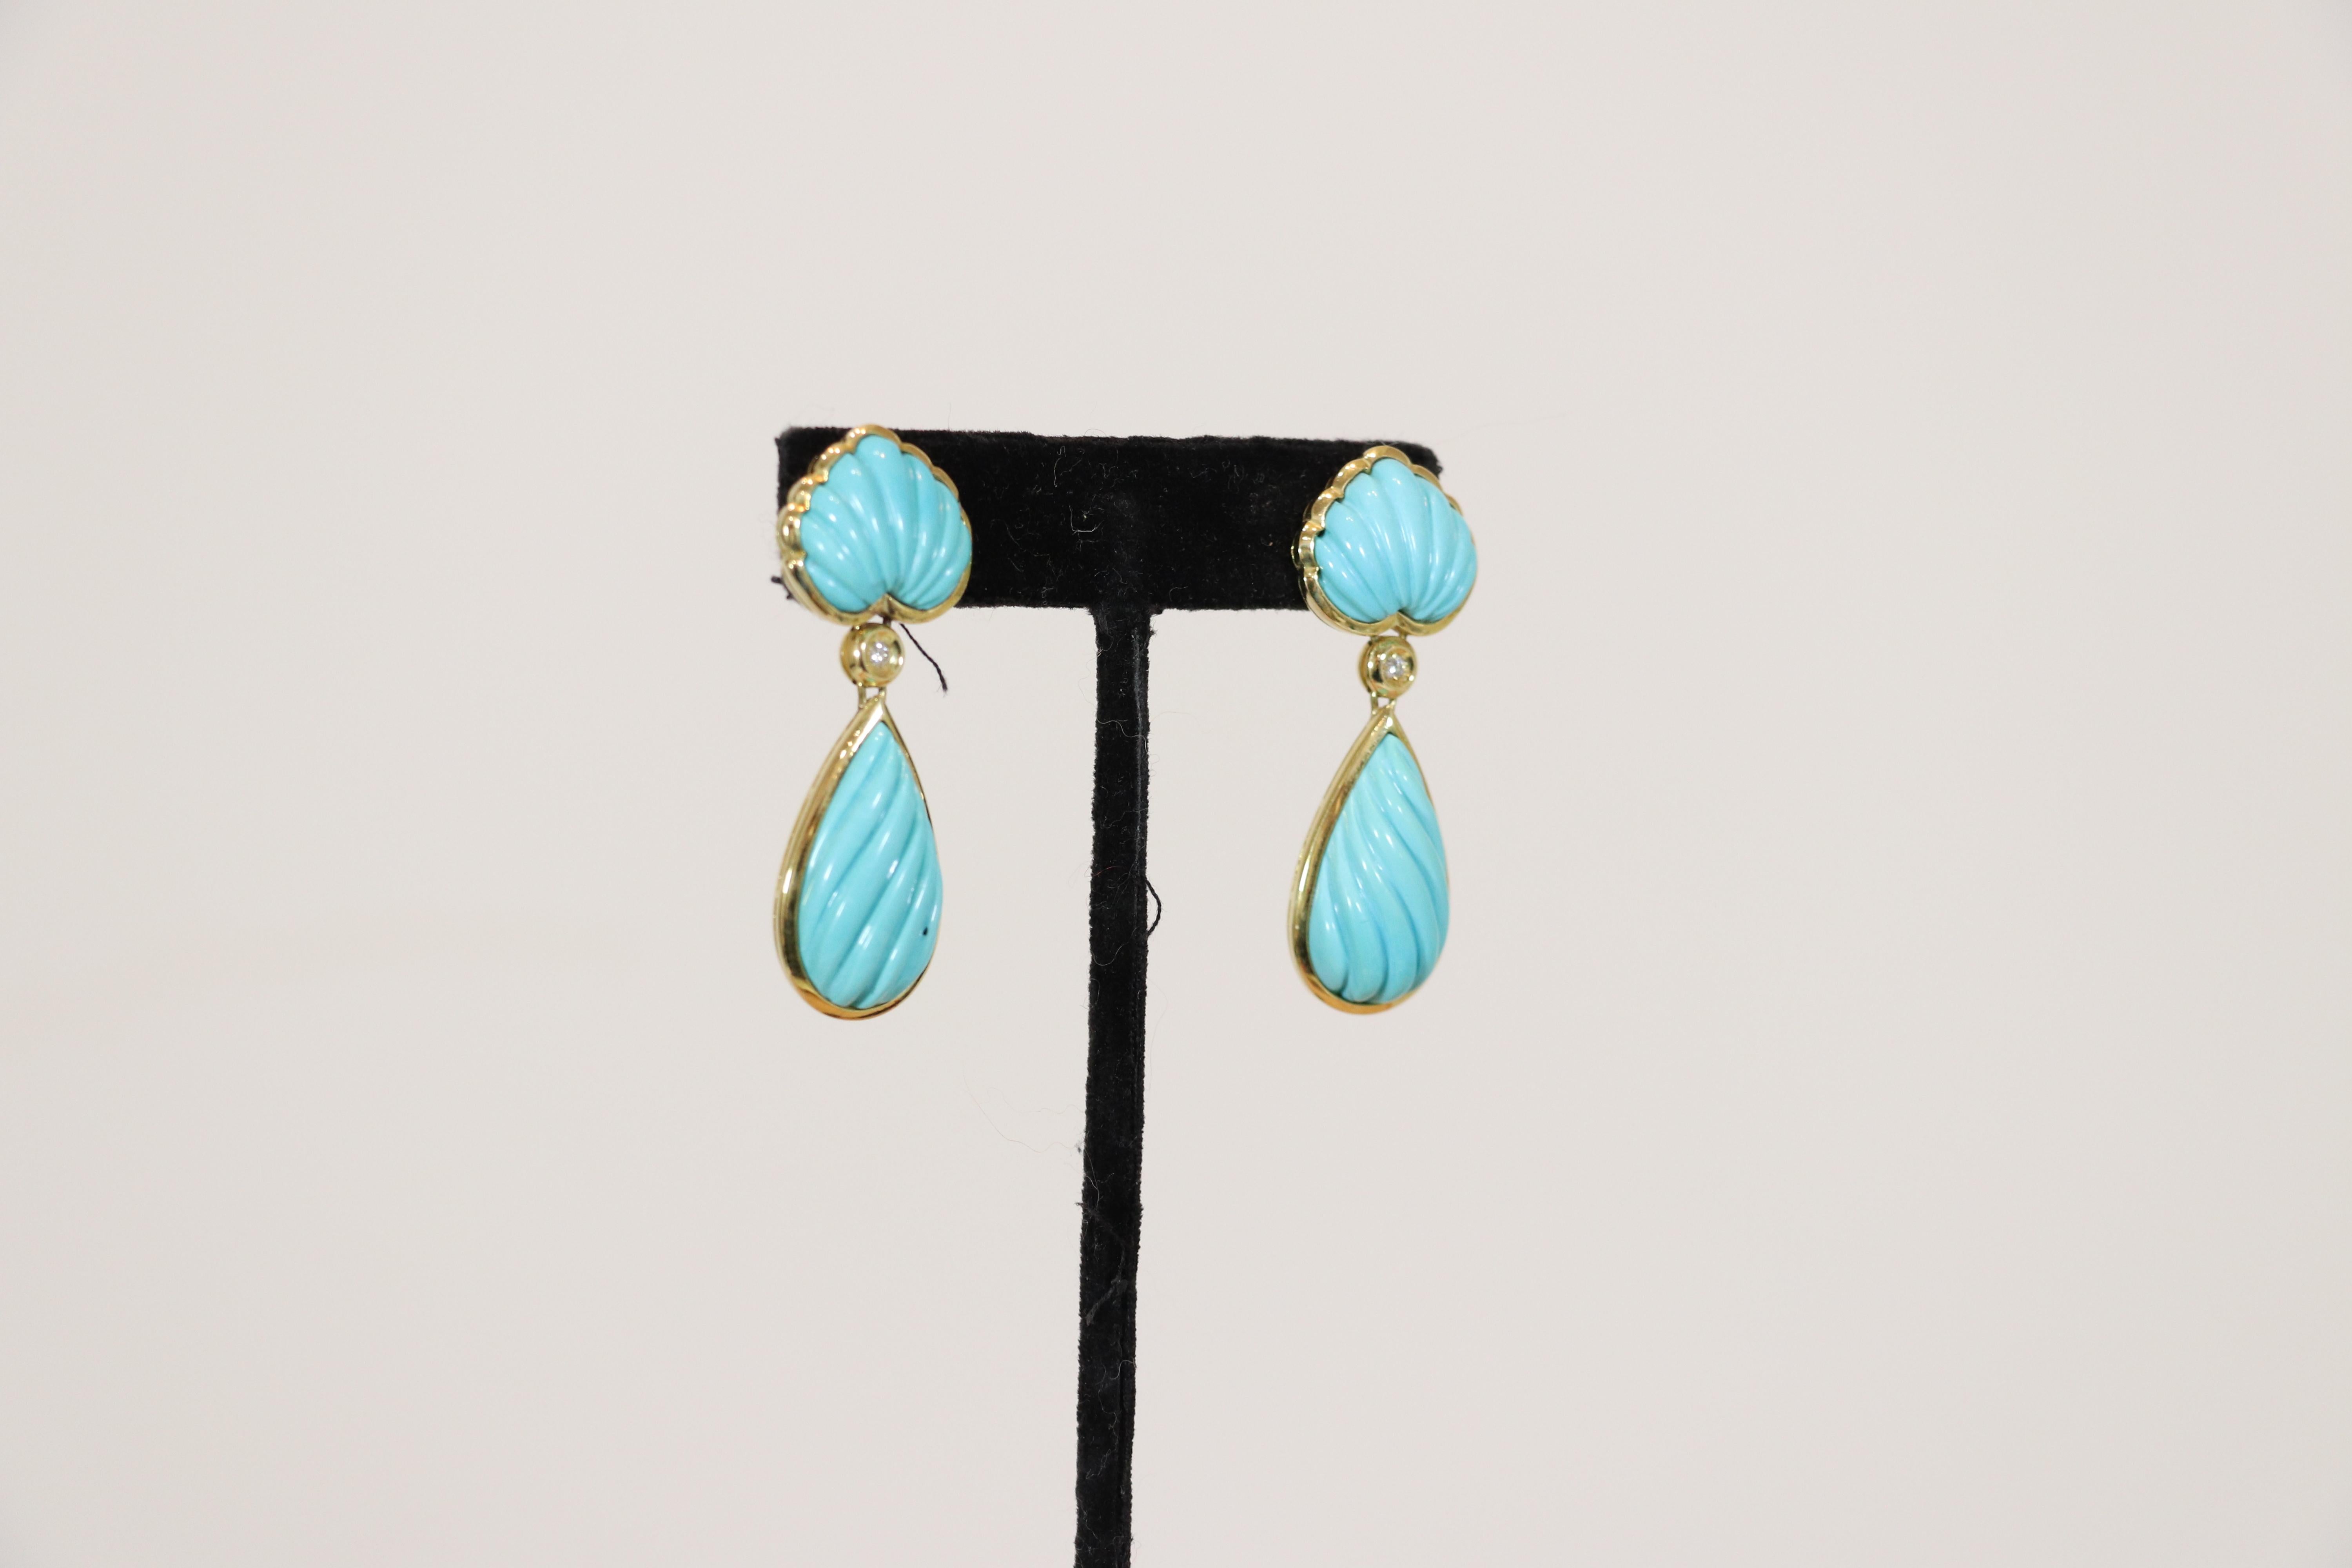 Stunning Sleeping Beauty carved turquoise and diamond earrings set in 18k yellow gold with pierced backings. Gorgeous color to the turquoise. Turquoise origin attributed to Sleeping Beauty mine, purchased at a high end jewelry store in Italy.